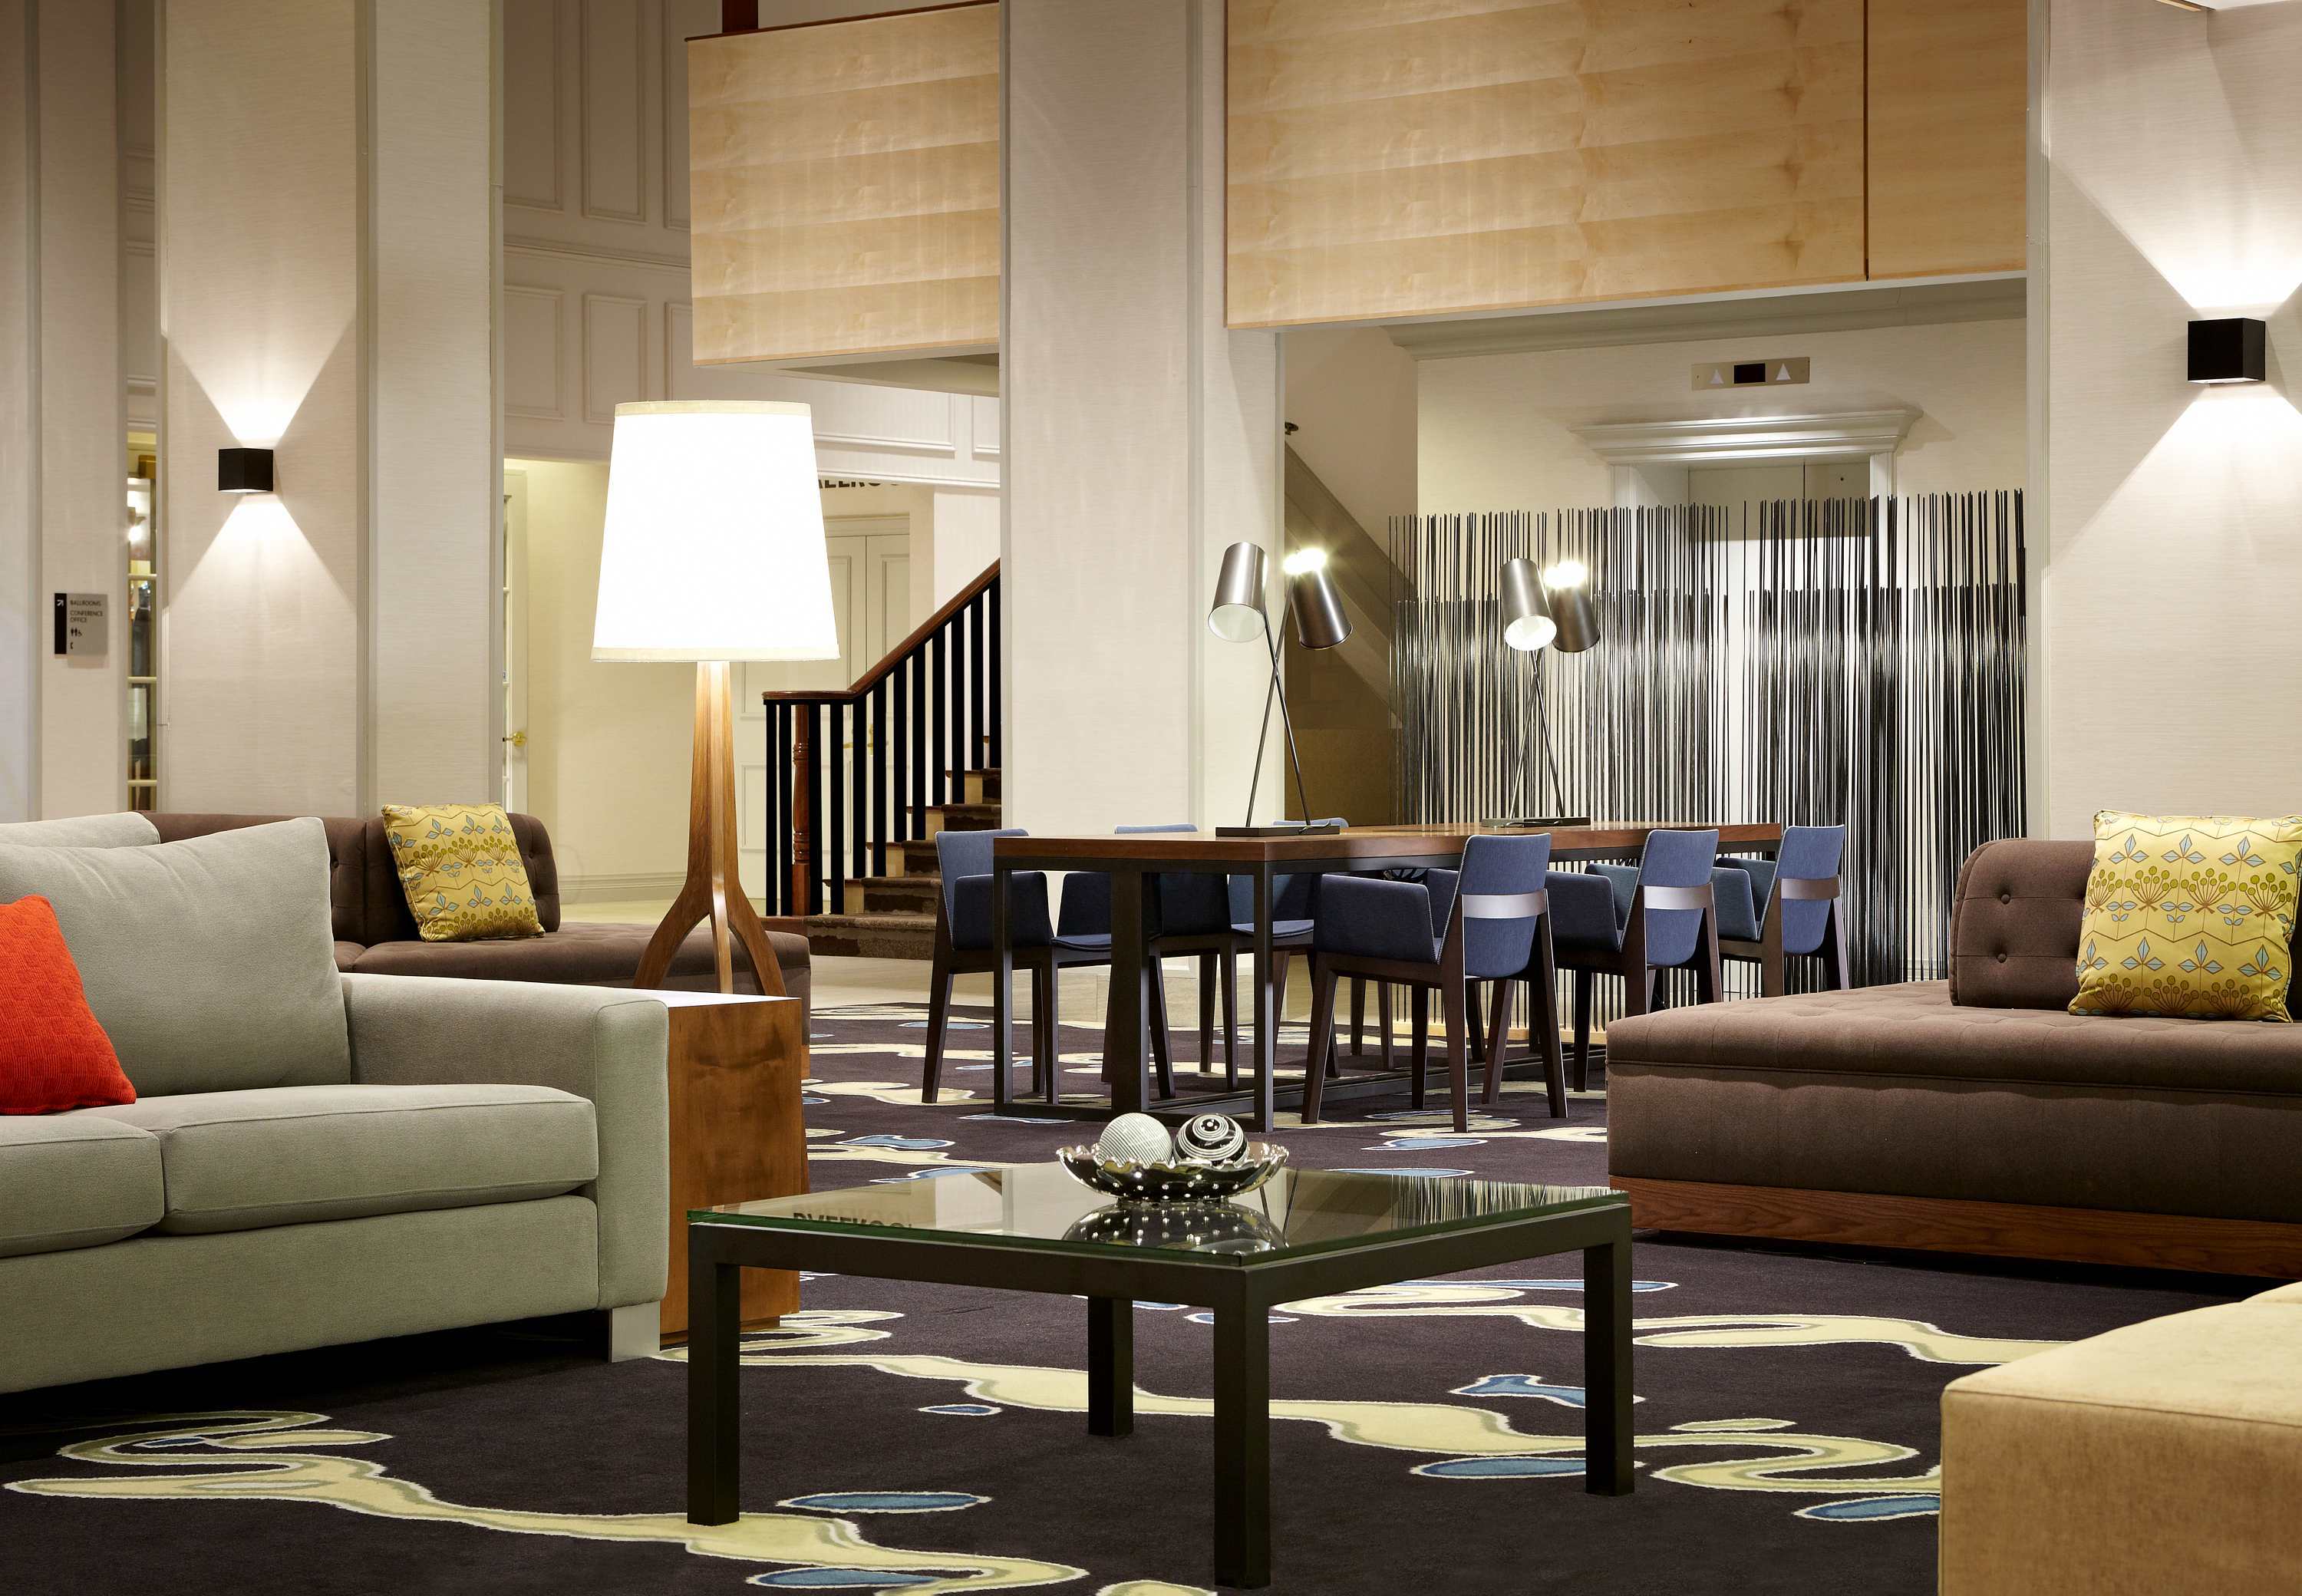 Photo of Delta Hotels by Marriott Fredericton, Fredericton, NB, Canada